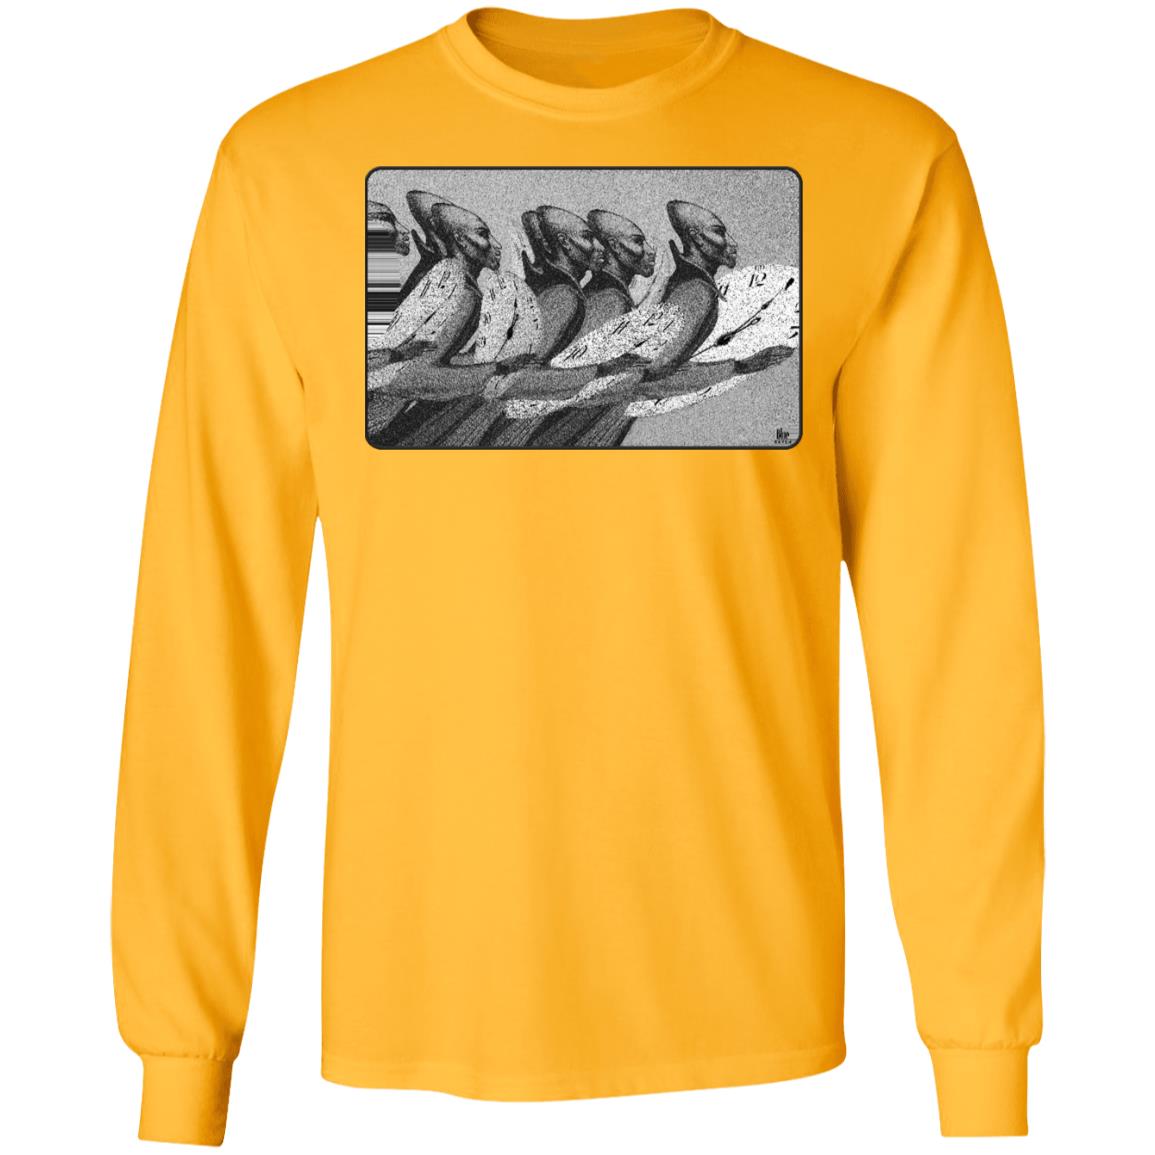 Time Marching On - B&W - Men's Long Sleeve T-Shirt